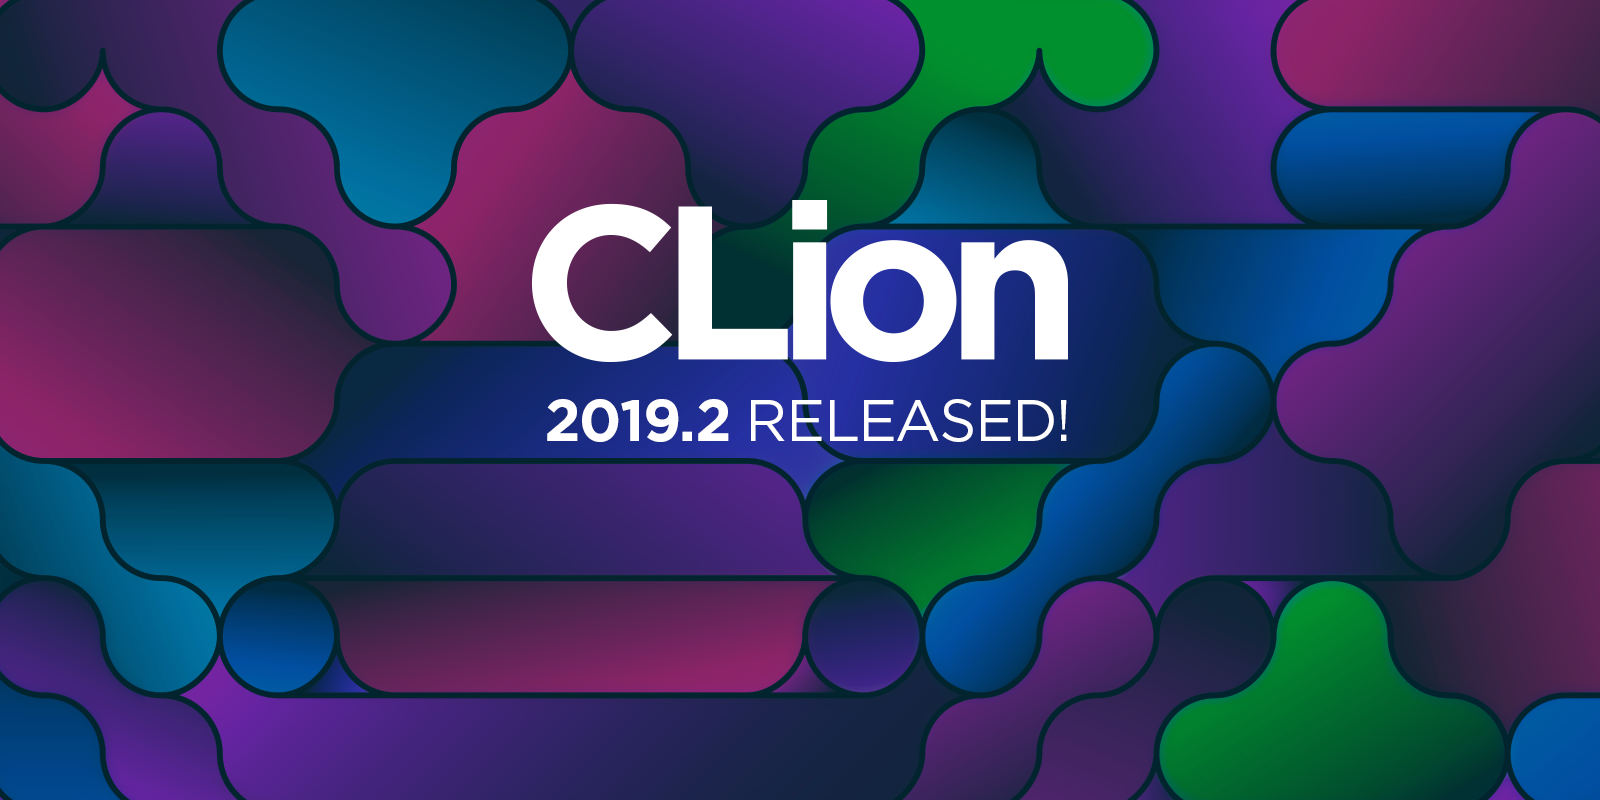 CLion 2019.2 released